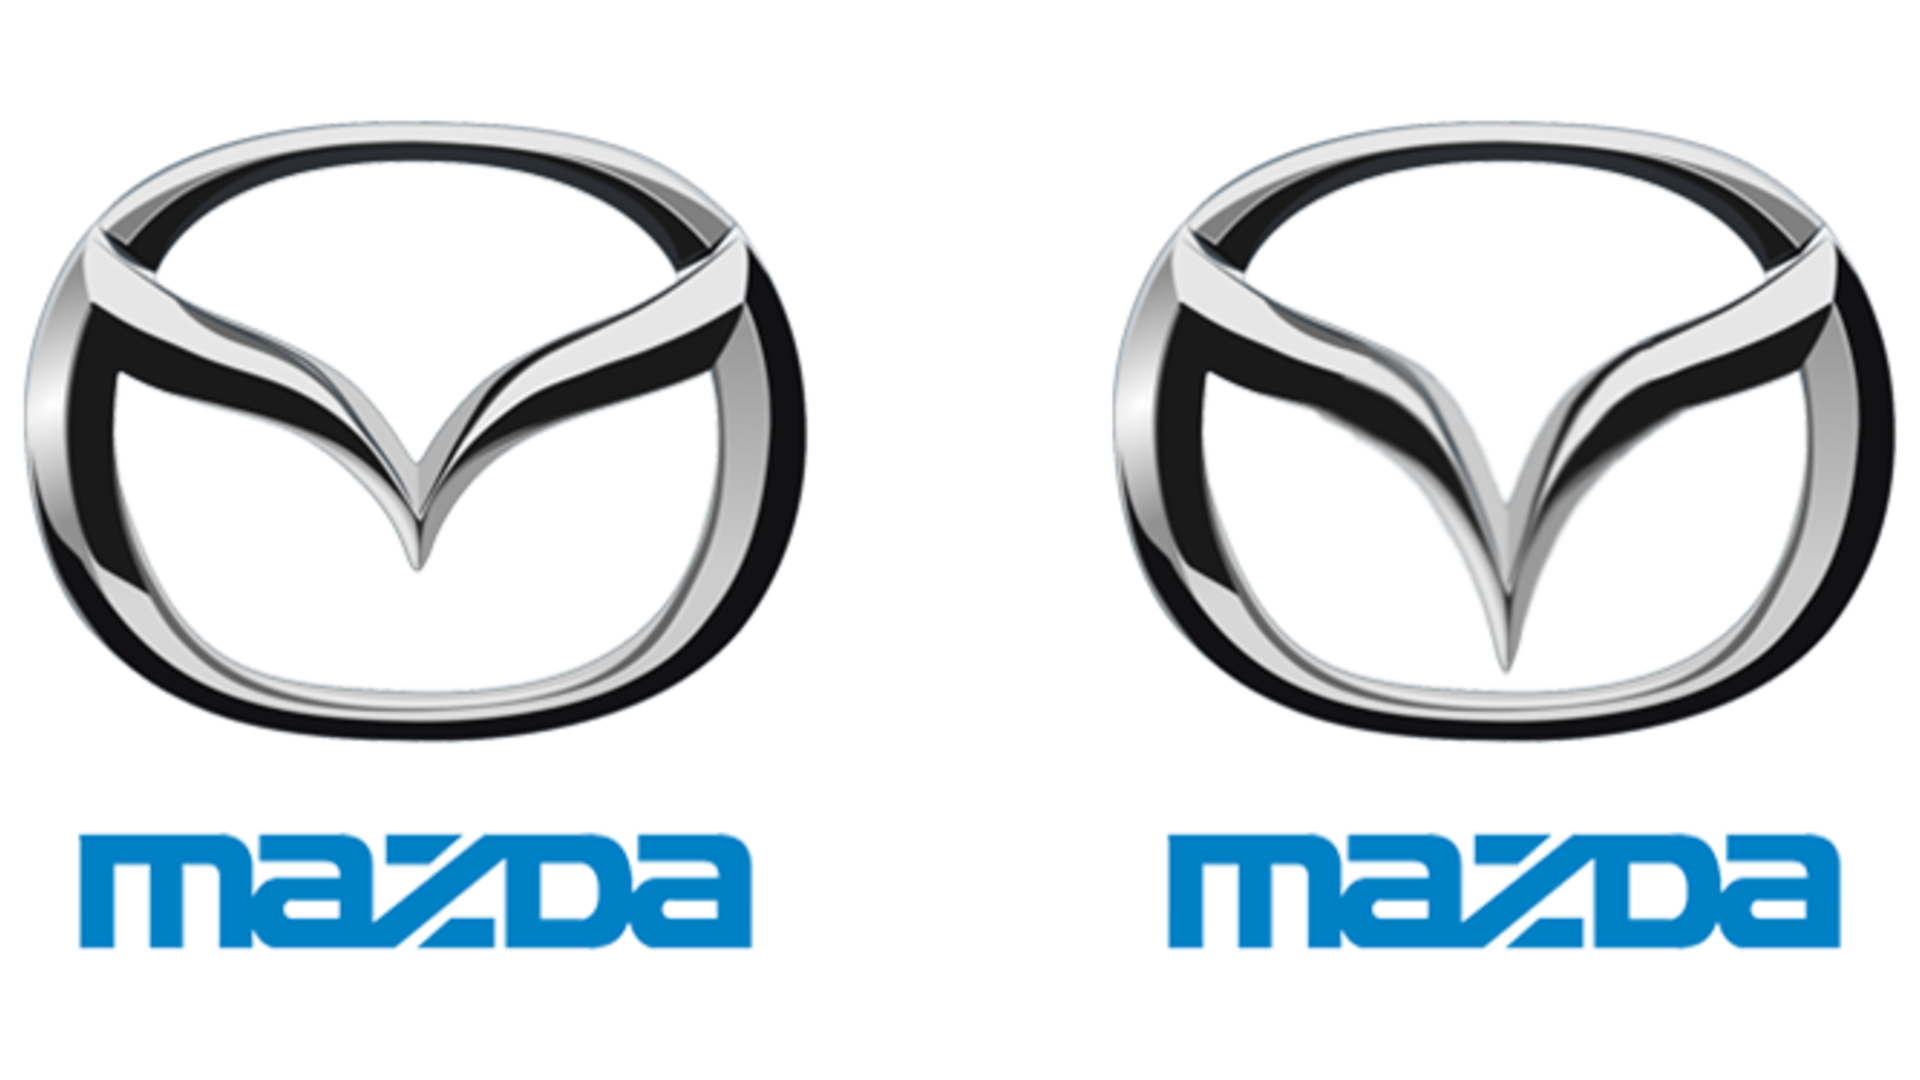 Spot The Difference Test Your Knowledge Of Car Badges